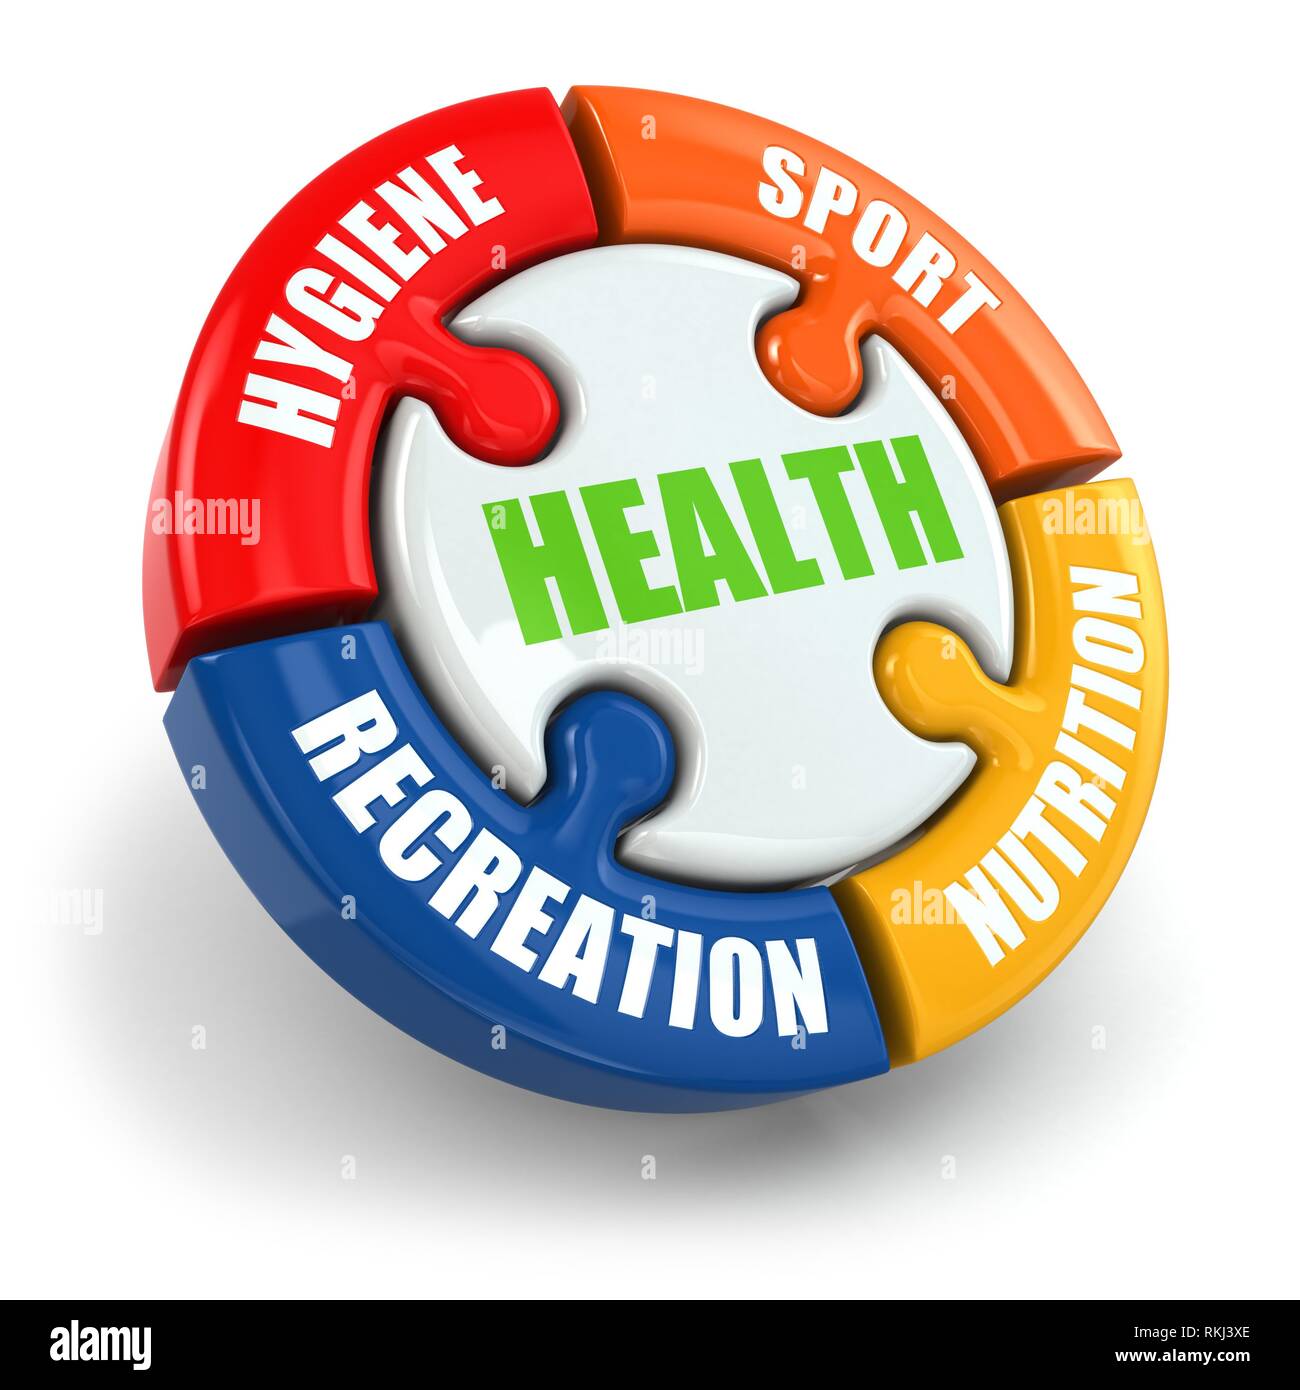 Medical infographic. Health is sport, hygiene, nutrition and ...